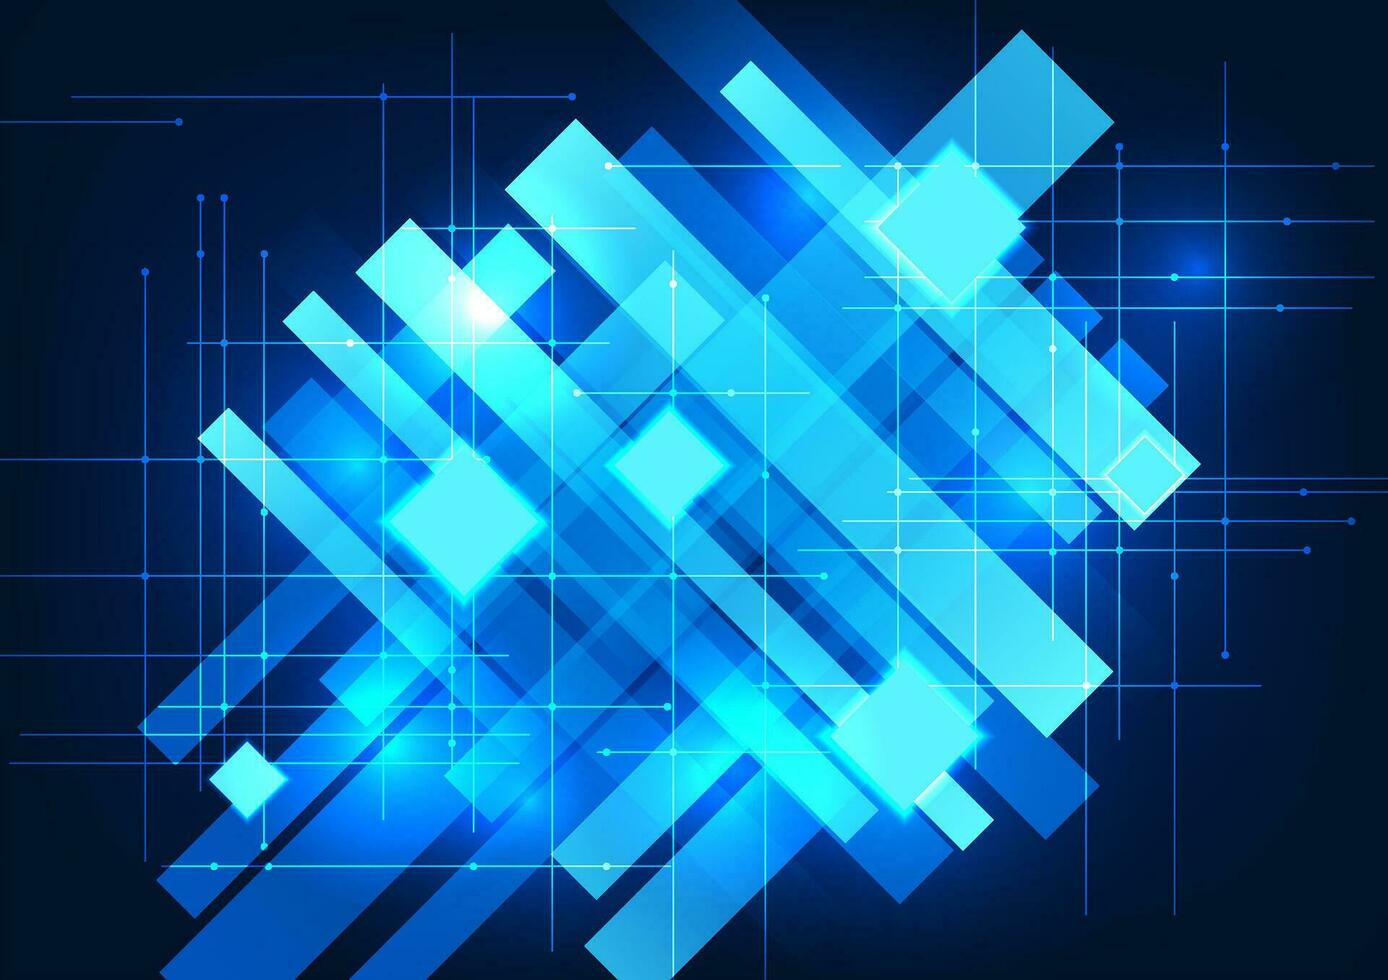 Abstract technology background Square geometric shapes stacked together. With lines running through it to give it an interesting, high-tech dimension. Suitable for work related to technology vector